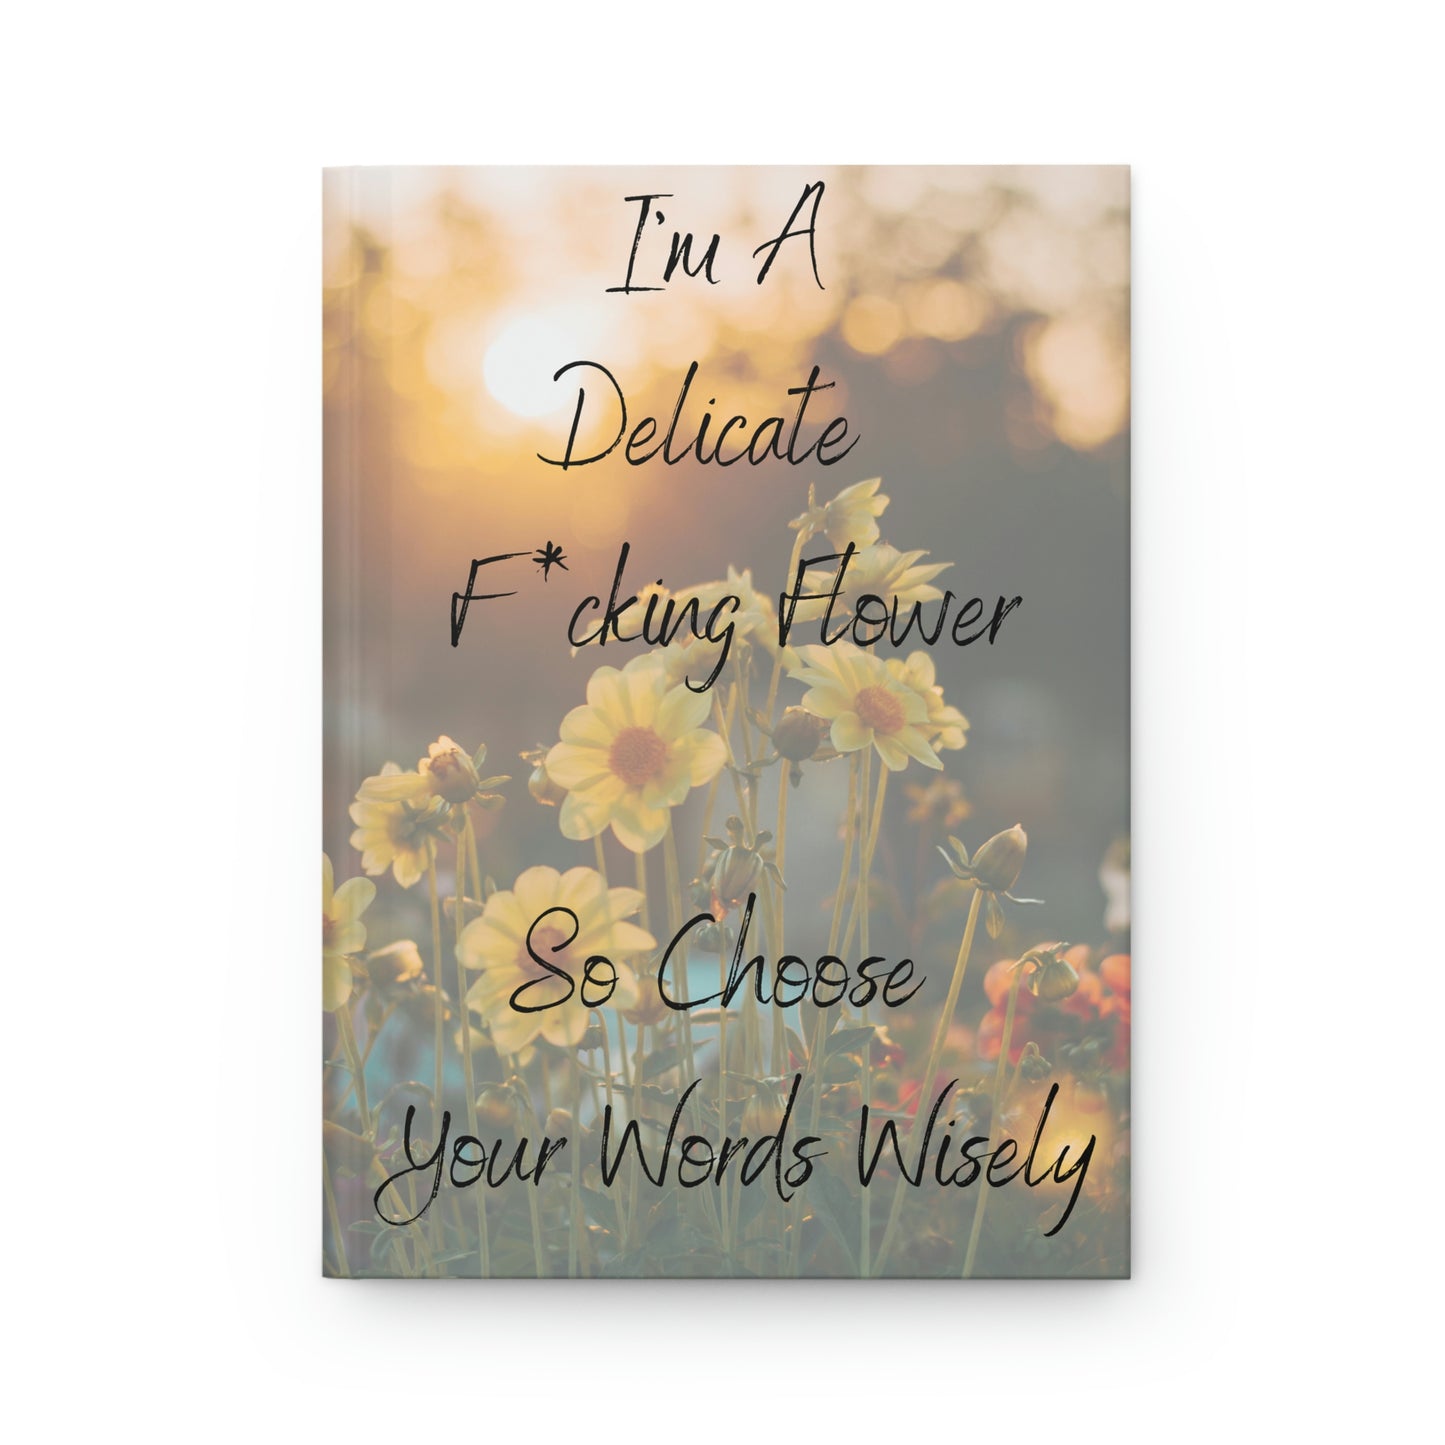 Choose Your Words Wisely Hardcover Journal Matte